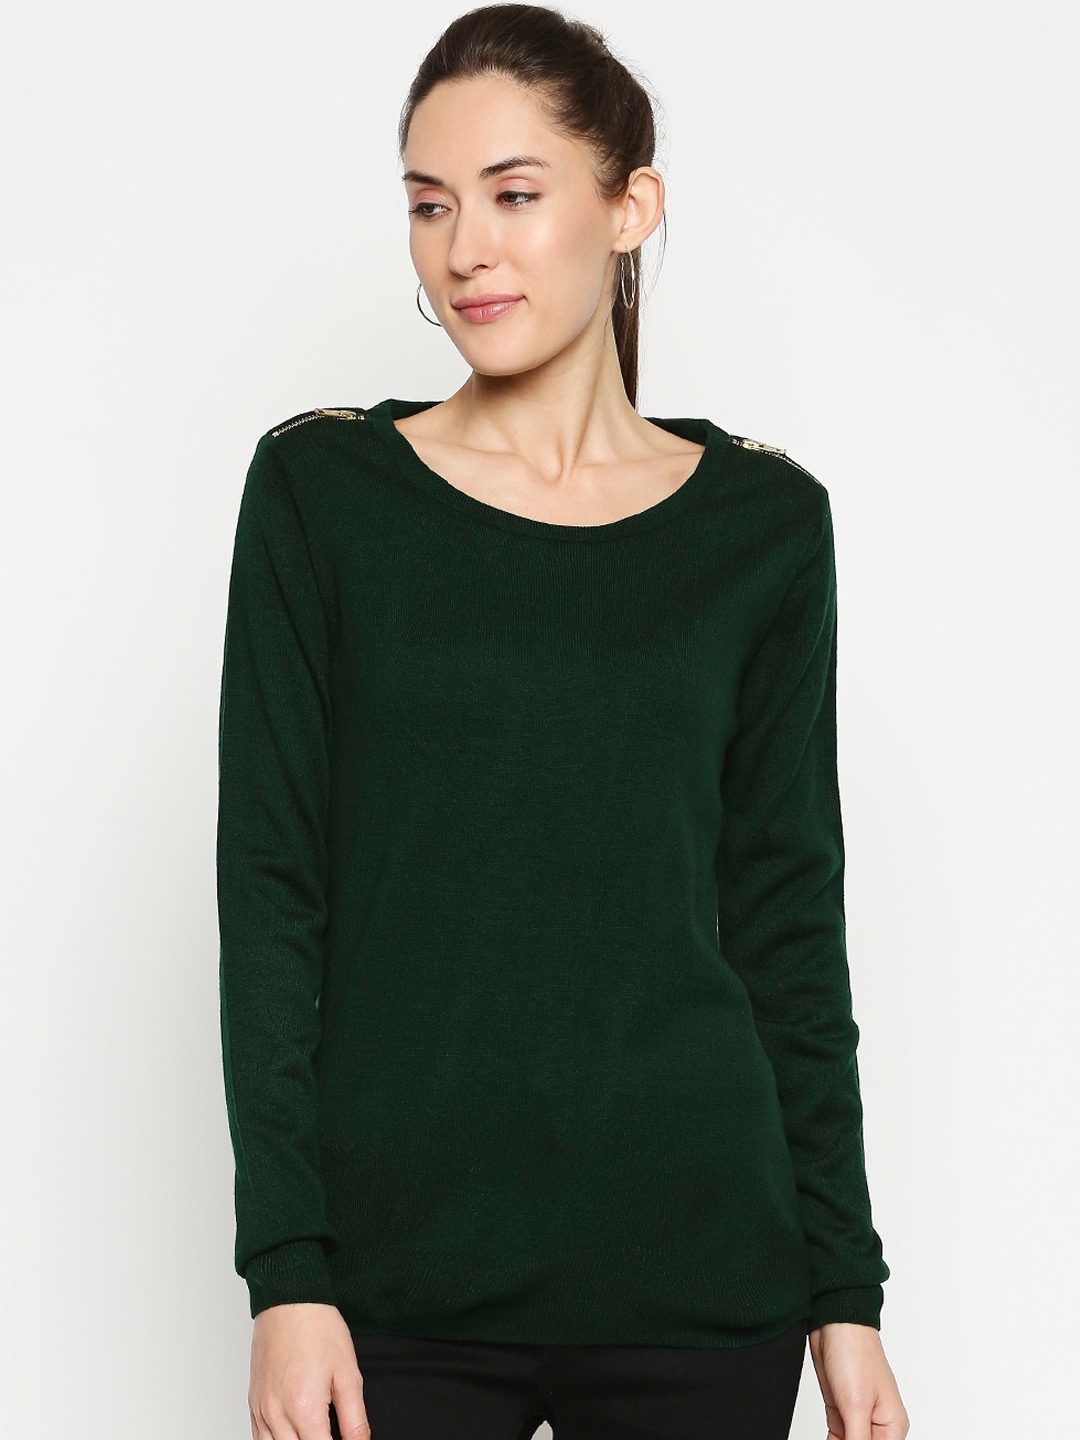 Annabelle by Pantaloons Women Green Solid Pullover Sweater Price in India